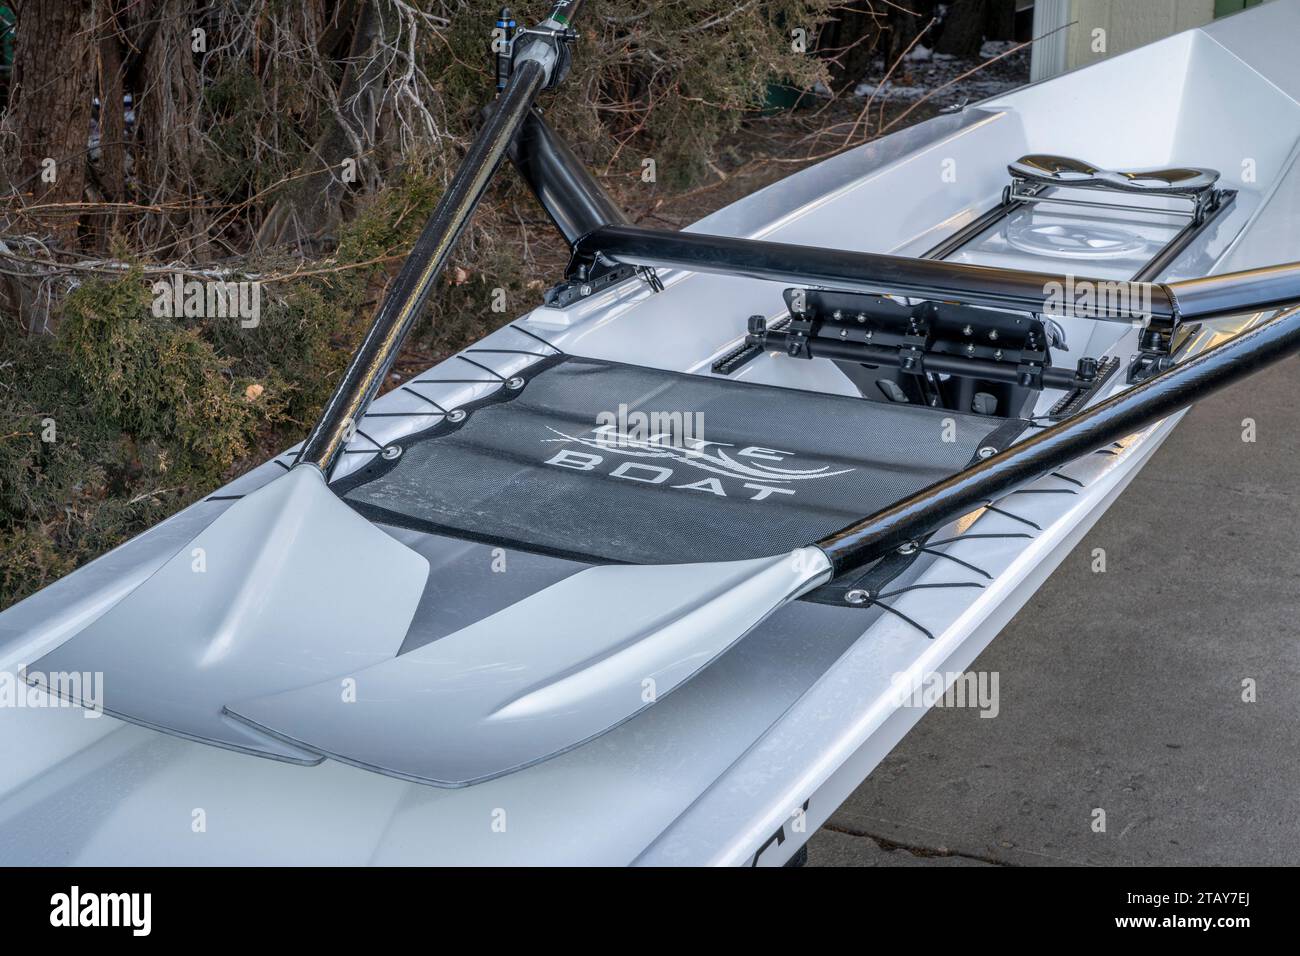 Fort Collins, CO, USA - December 2, 2023: Cockpit of a coastal rowing shell with sculling oars, Literace 1x by Litebox, in a driveway. Stock Photo